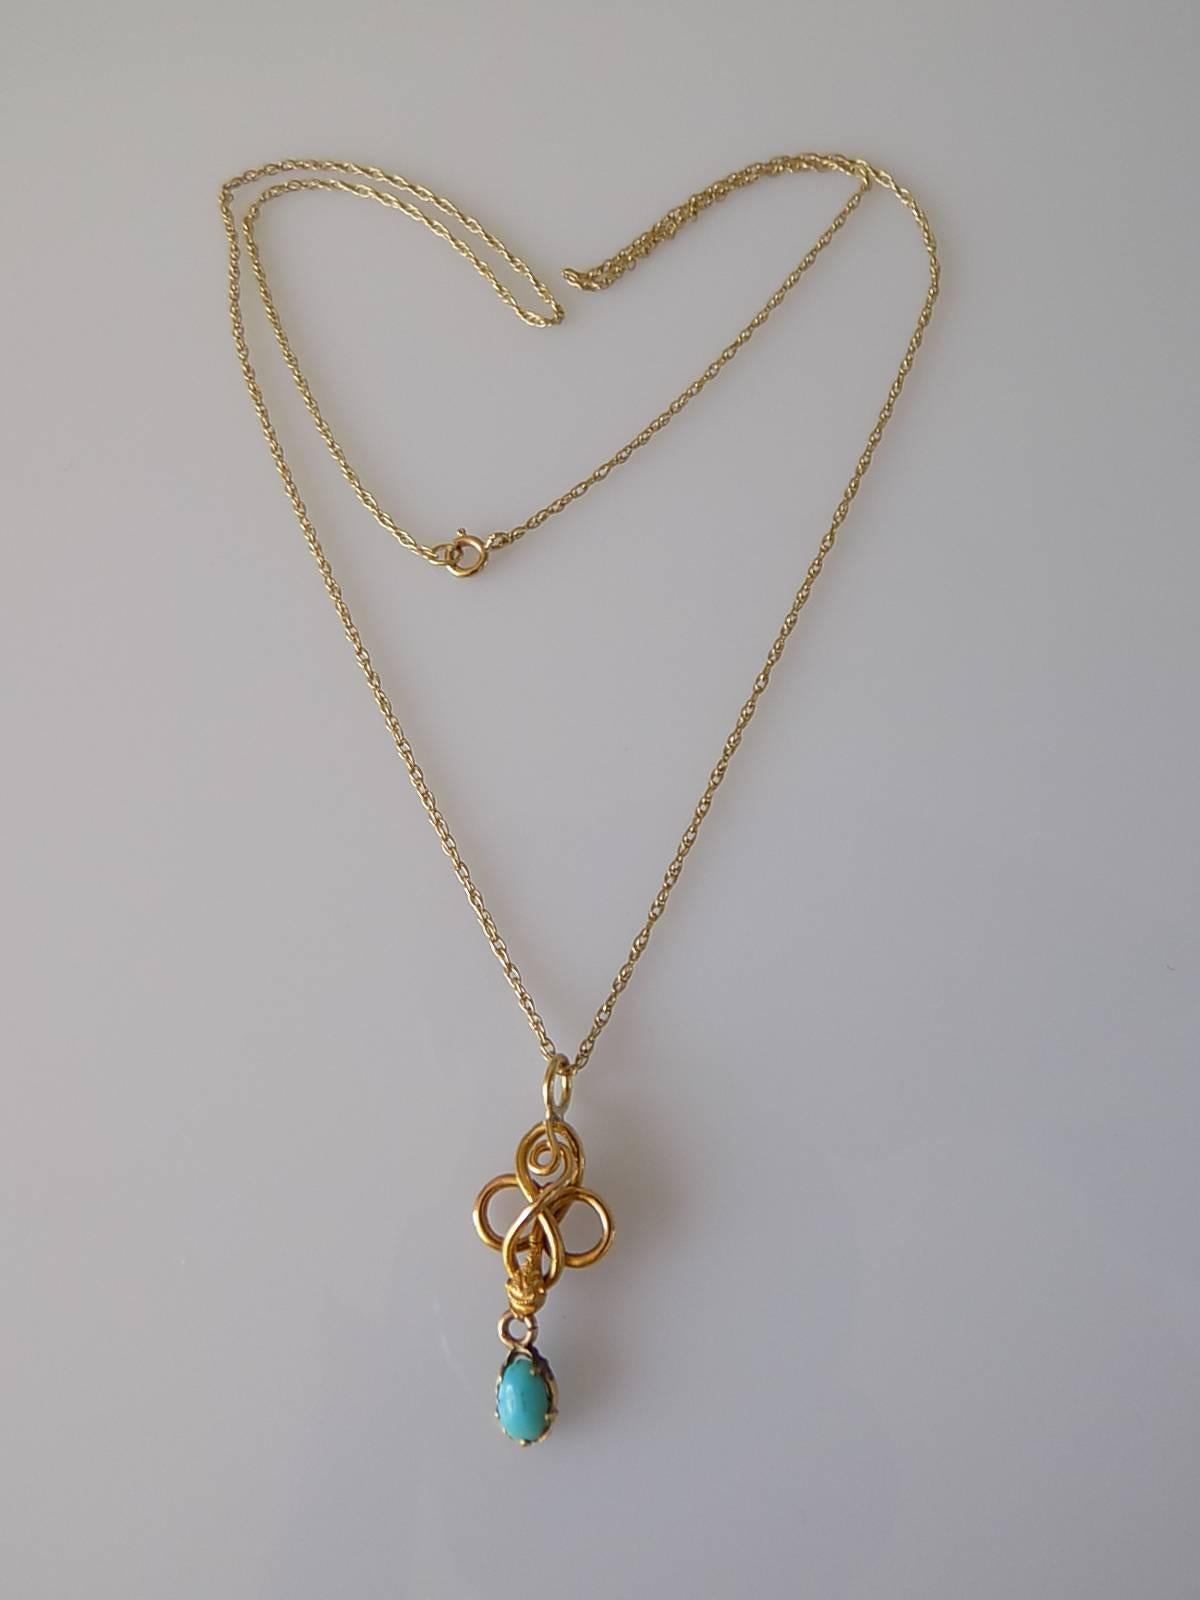 Women's Victorian Gold Turquoise Snake Pendant Necklace